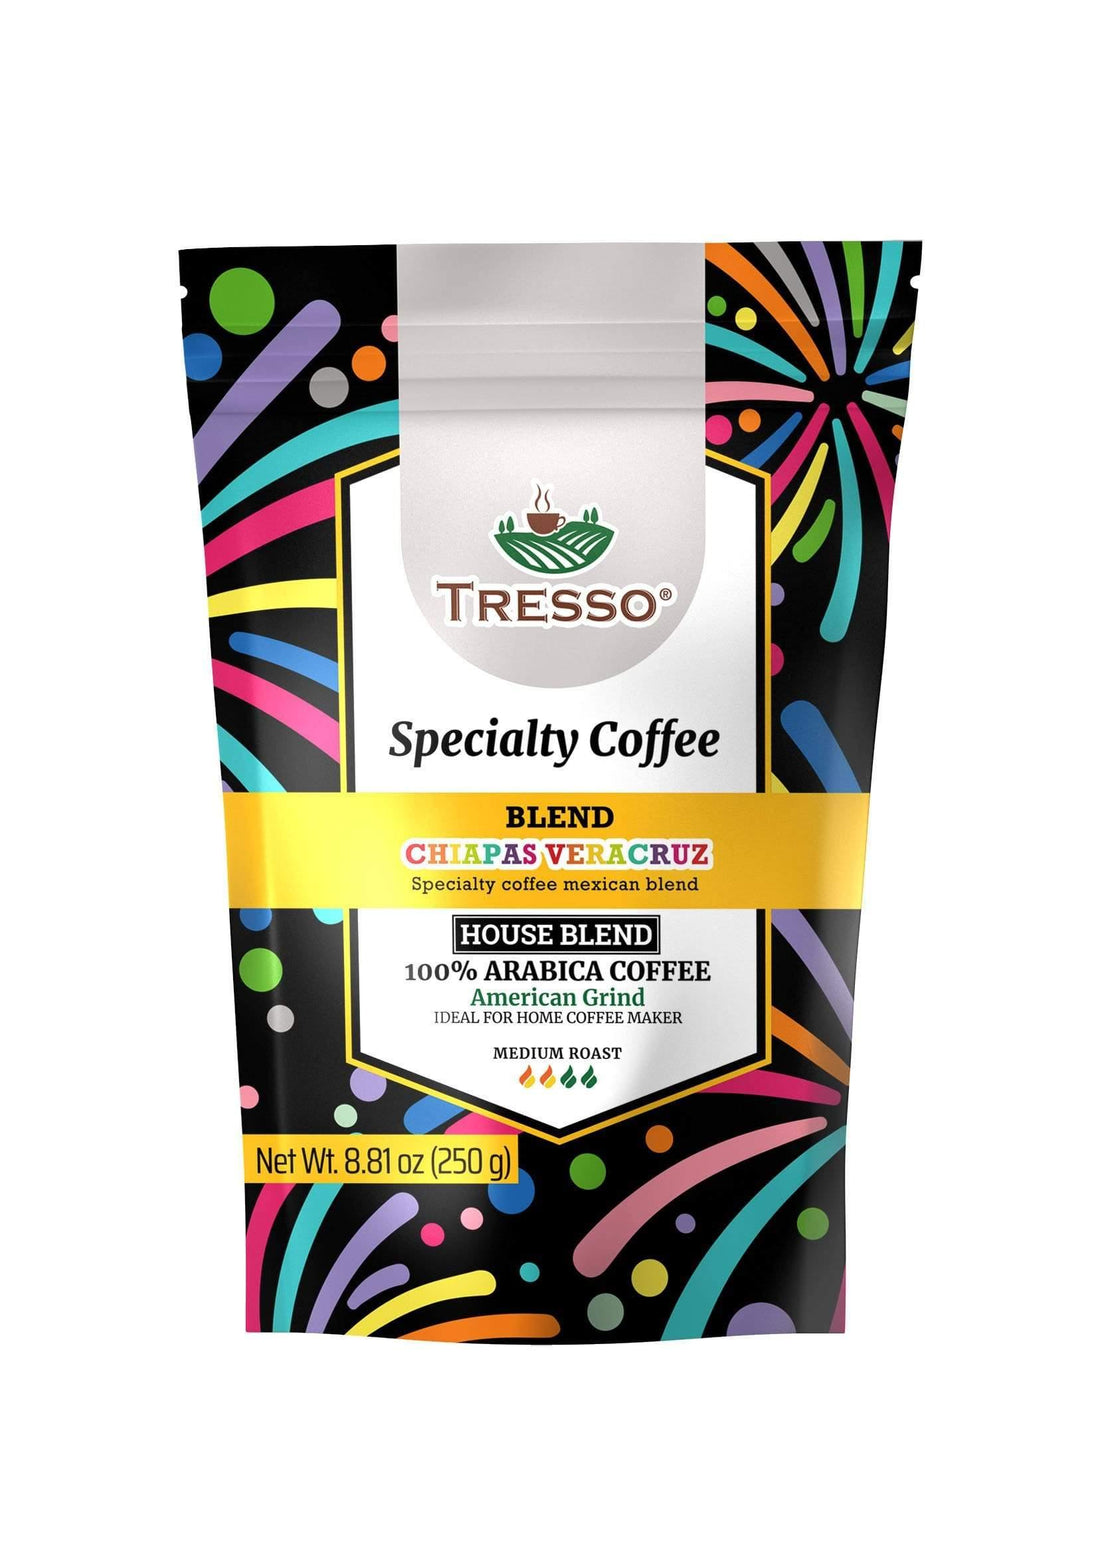 &quot;TRESSO Specialty Coffee Mexican Blend, Medium Roast, American Grind, 8.81Oz&quot; TRESSO® American grinder for home coffee maker/8.8 Oz 